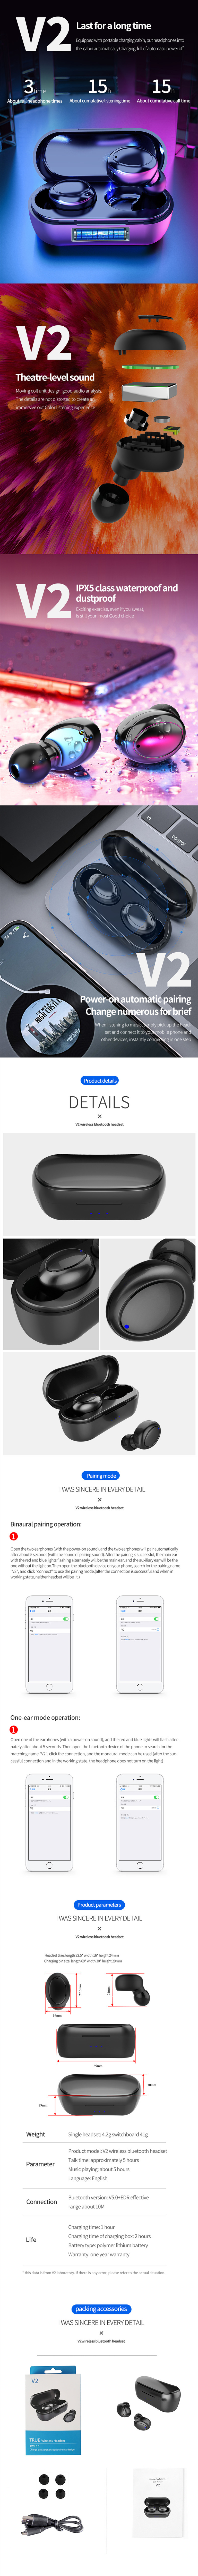 V2-TWS-Dynamic-bluetooth-50-Wireless-Stereo-Earbuds-Noise-Cancelling-Touch-Control-In-Ear-Earphone-w-1698848-2